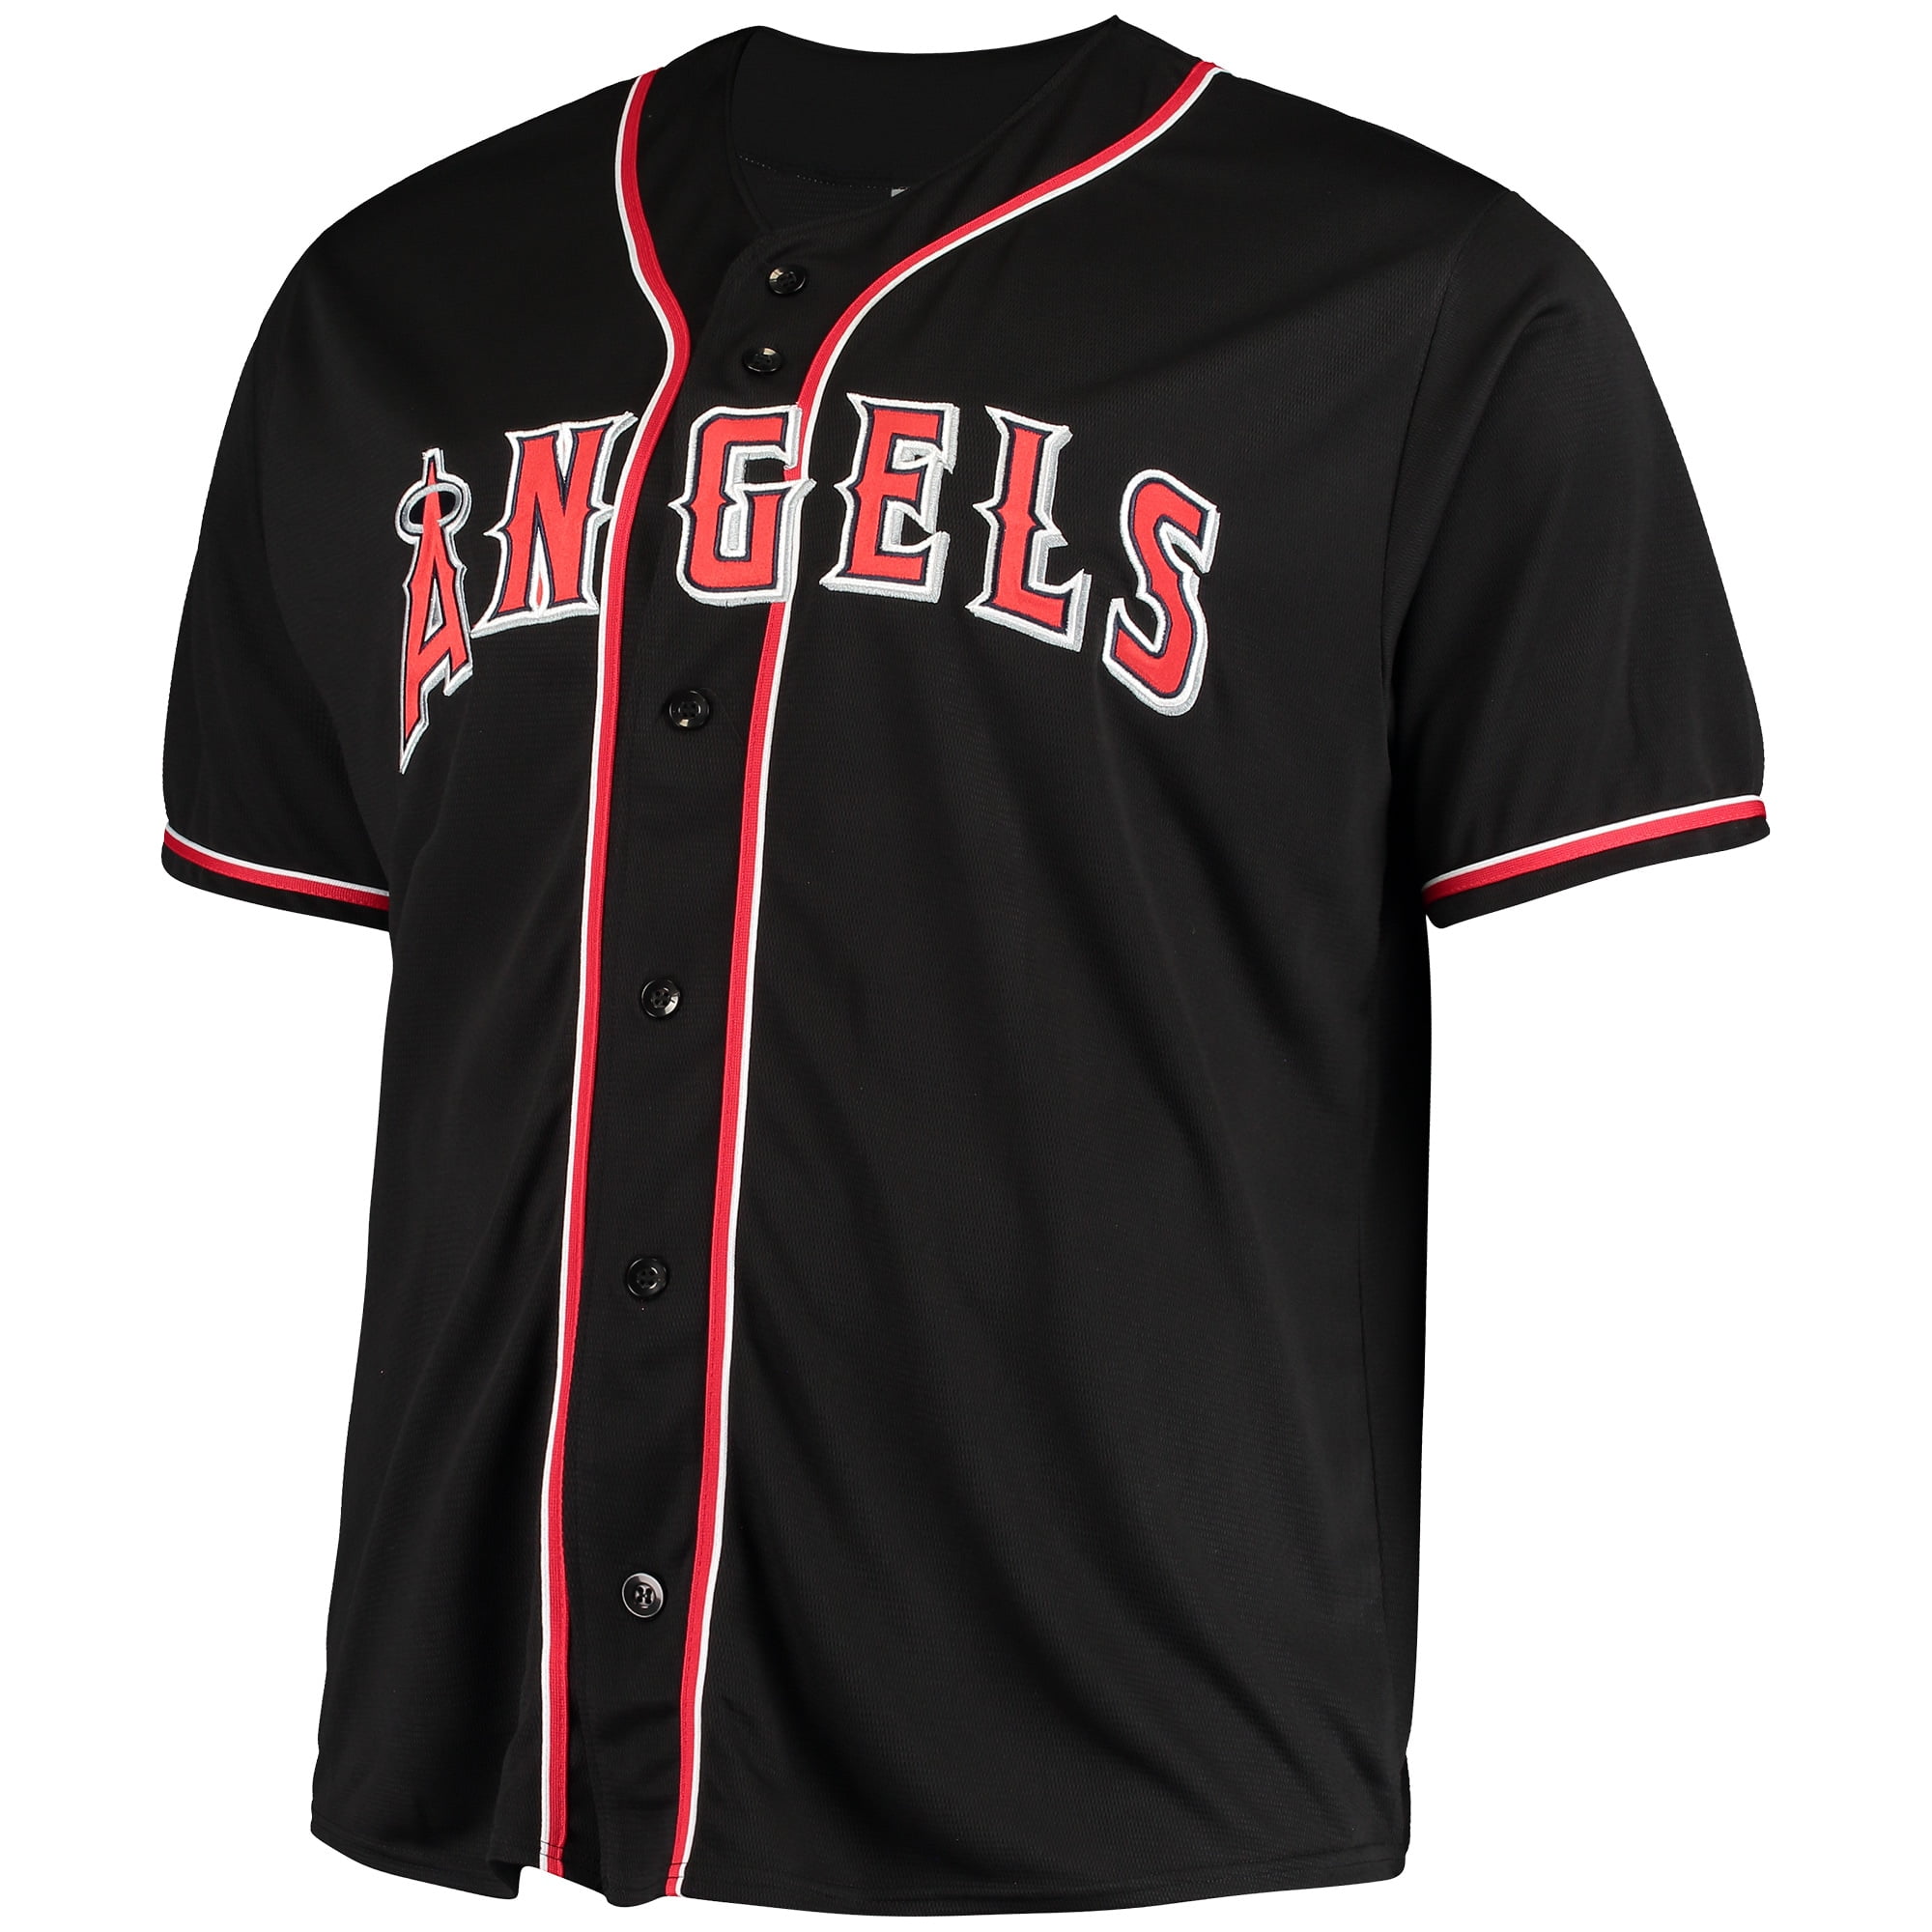 black and red angels jersey